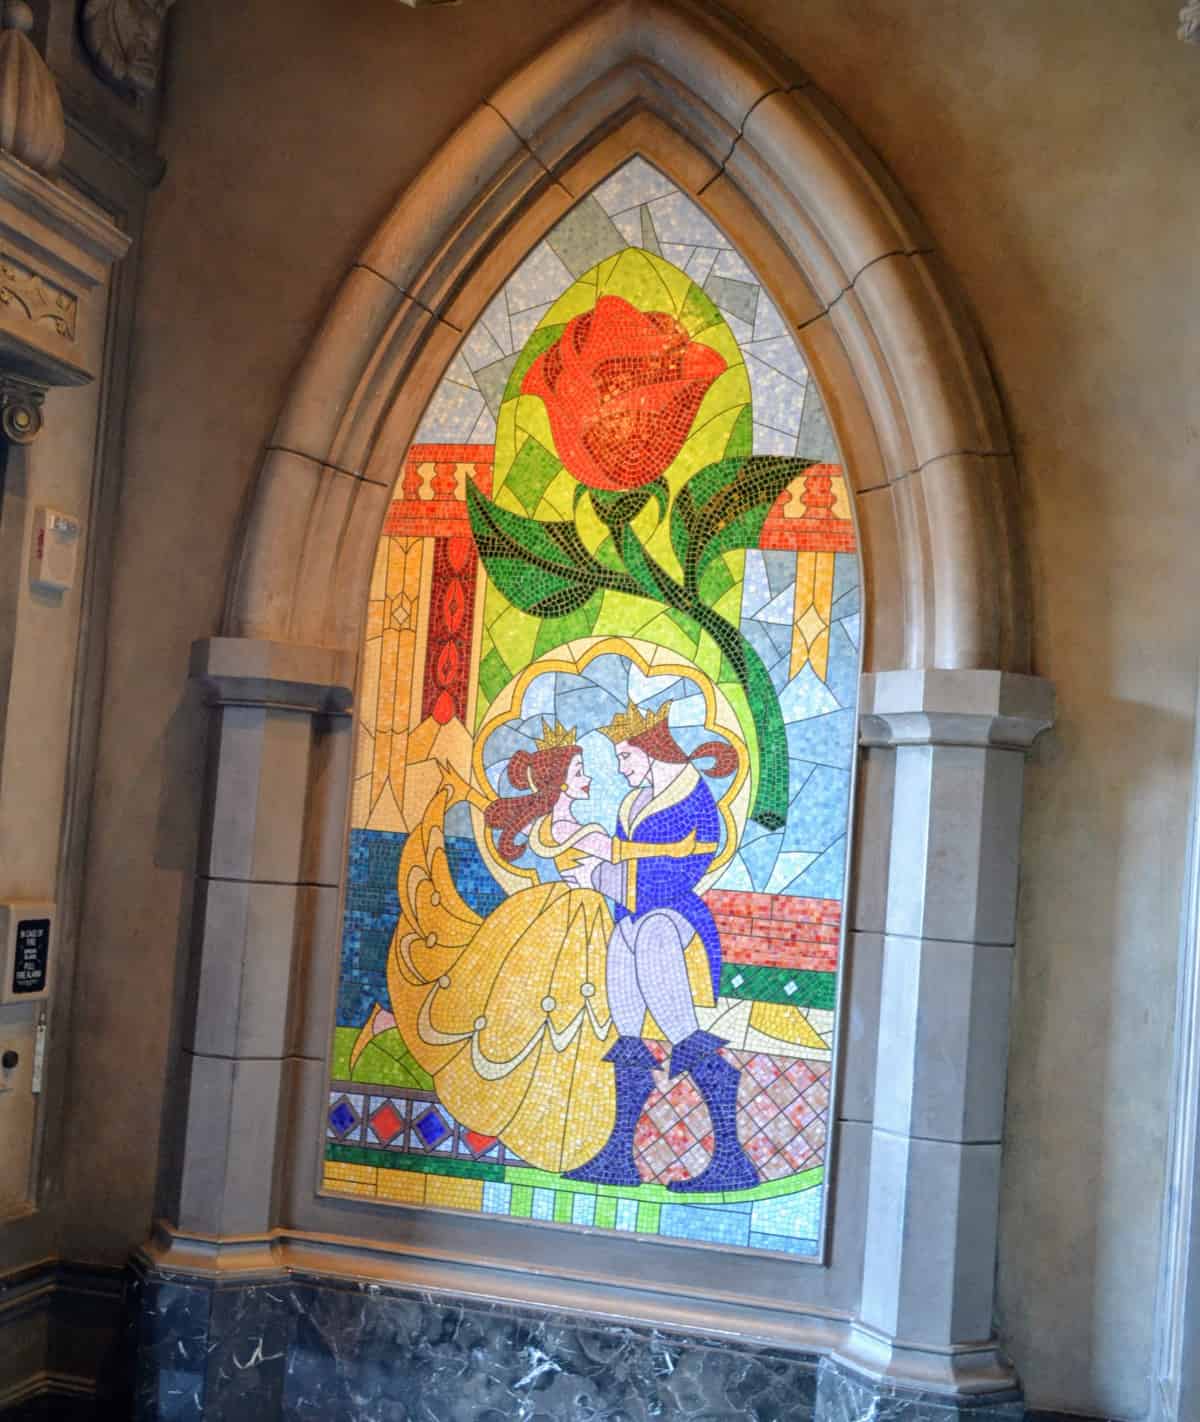 Where to find Beauty and the Beast at Disney World